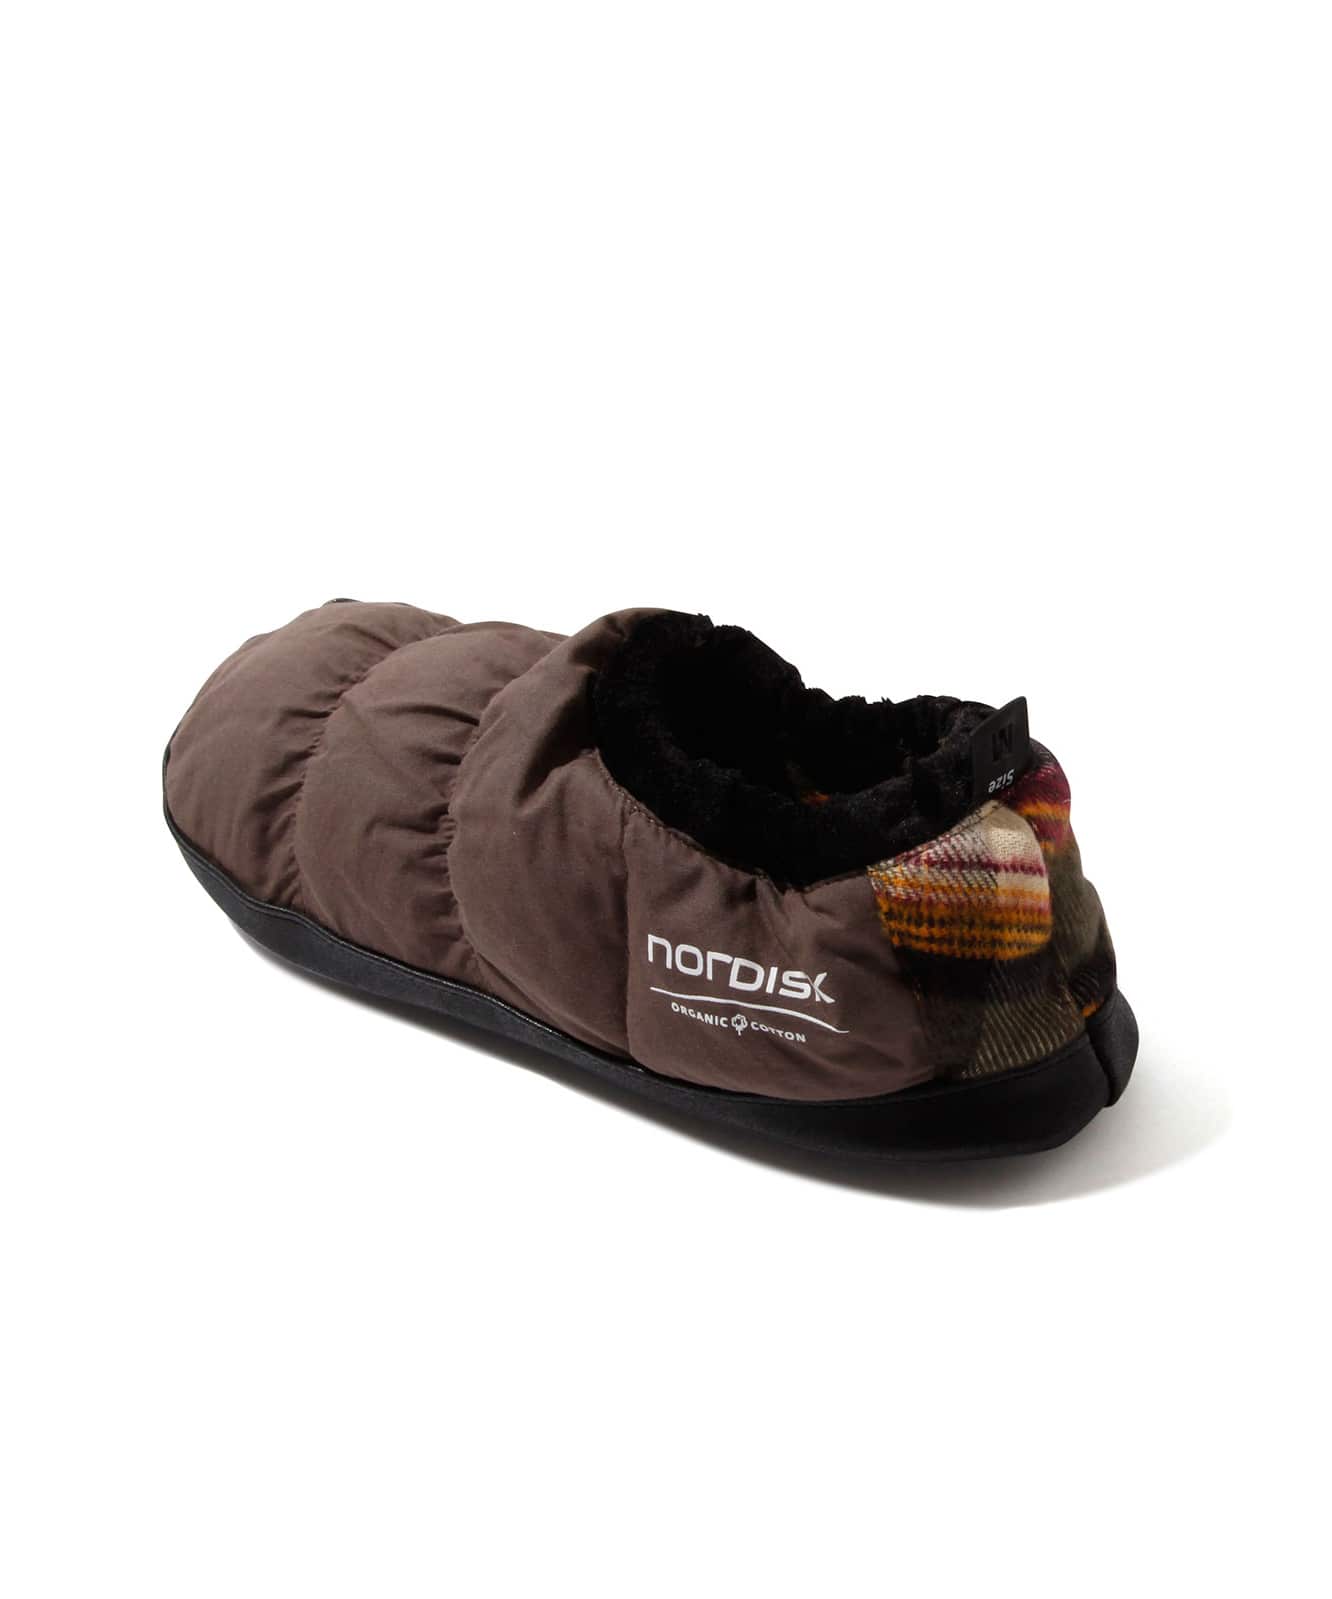 NORDISK HERMOD DOWN SLIPPERS/BUNGY CORD / ノルディスク ヘルモーズ ダウンシューズ / ROOT